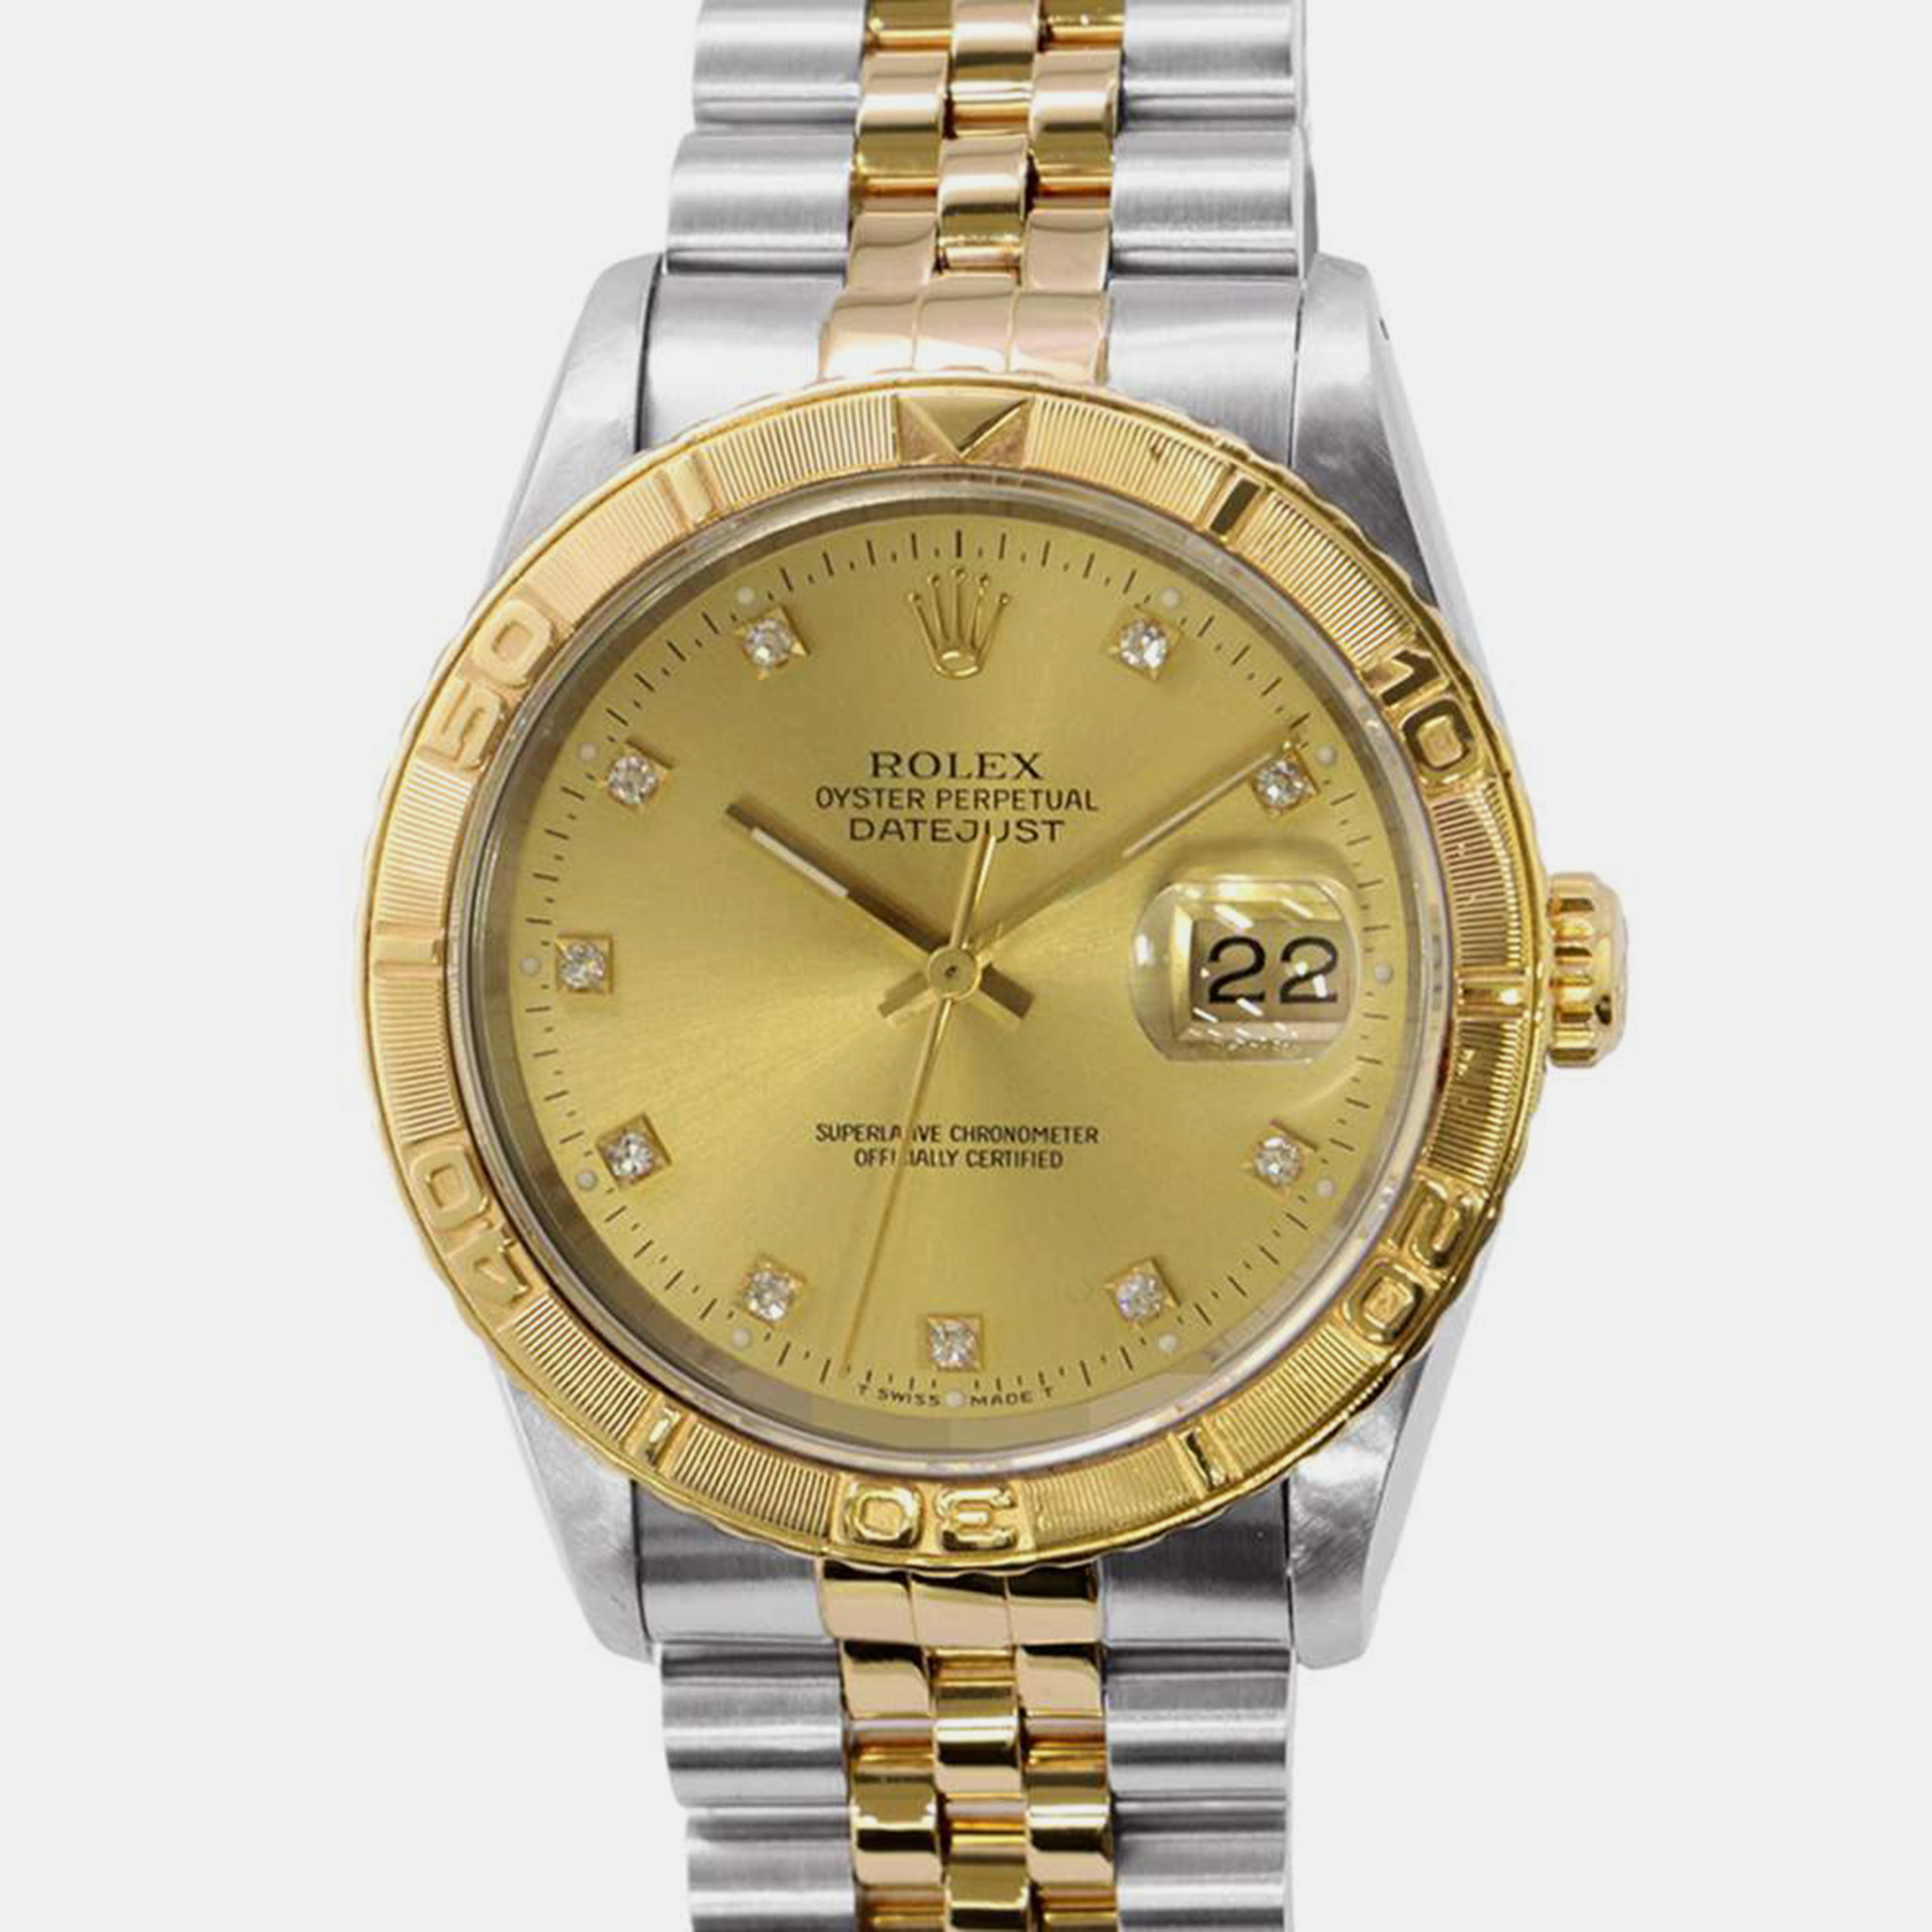 Pre-owned Rolex Champagne 18k Yellow Gold Stainless Steel Diamond Datejust Thunderbird Automatic Men's Wristwatch 36